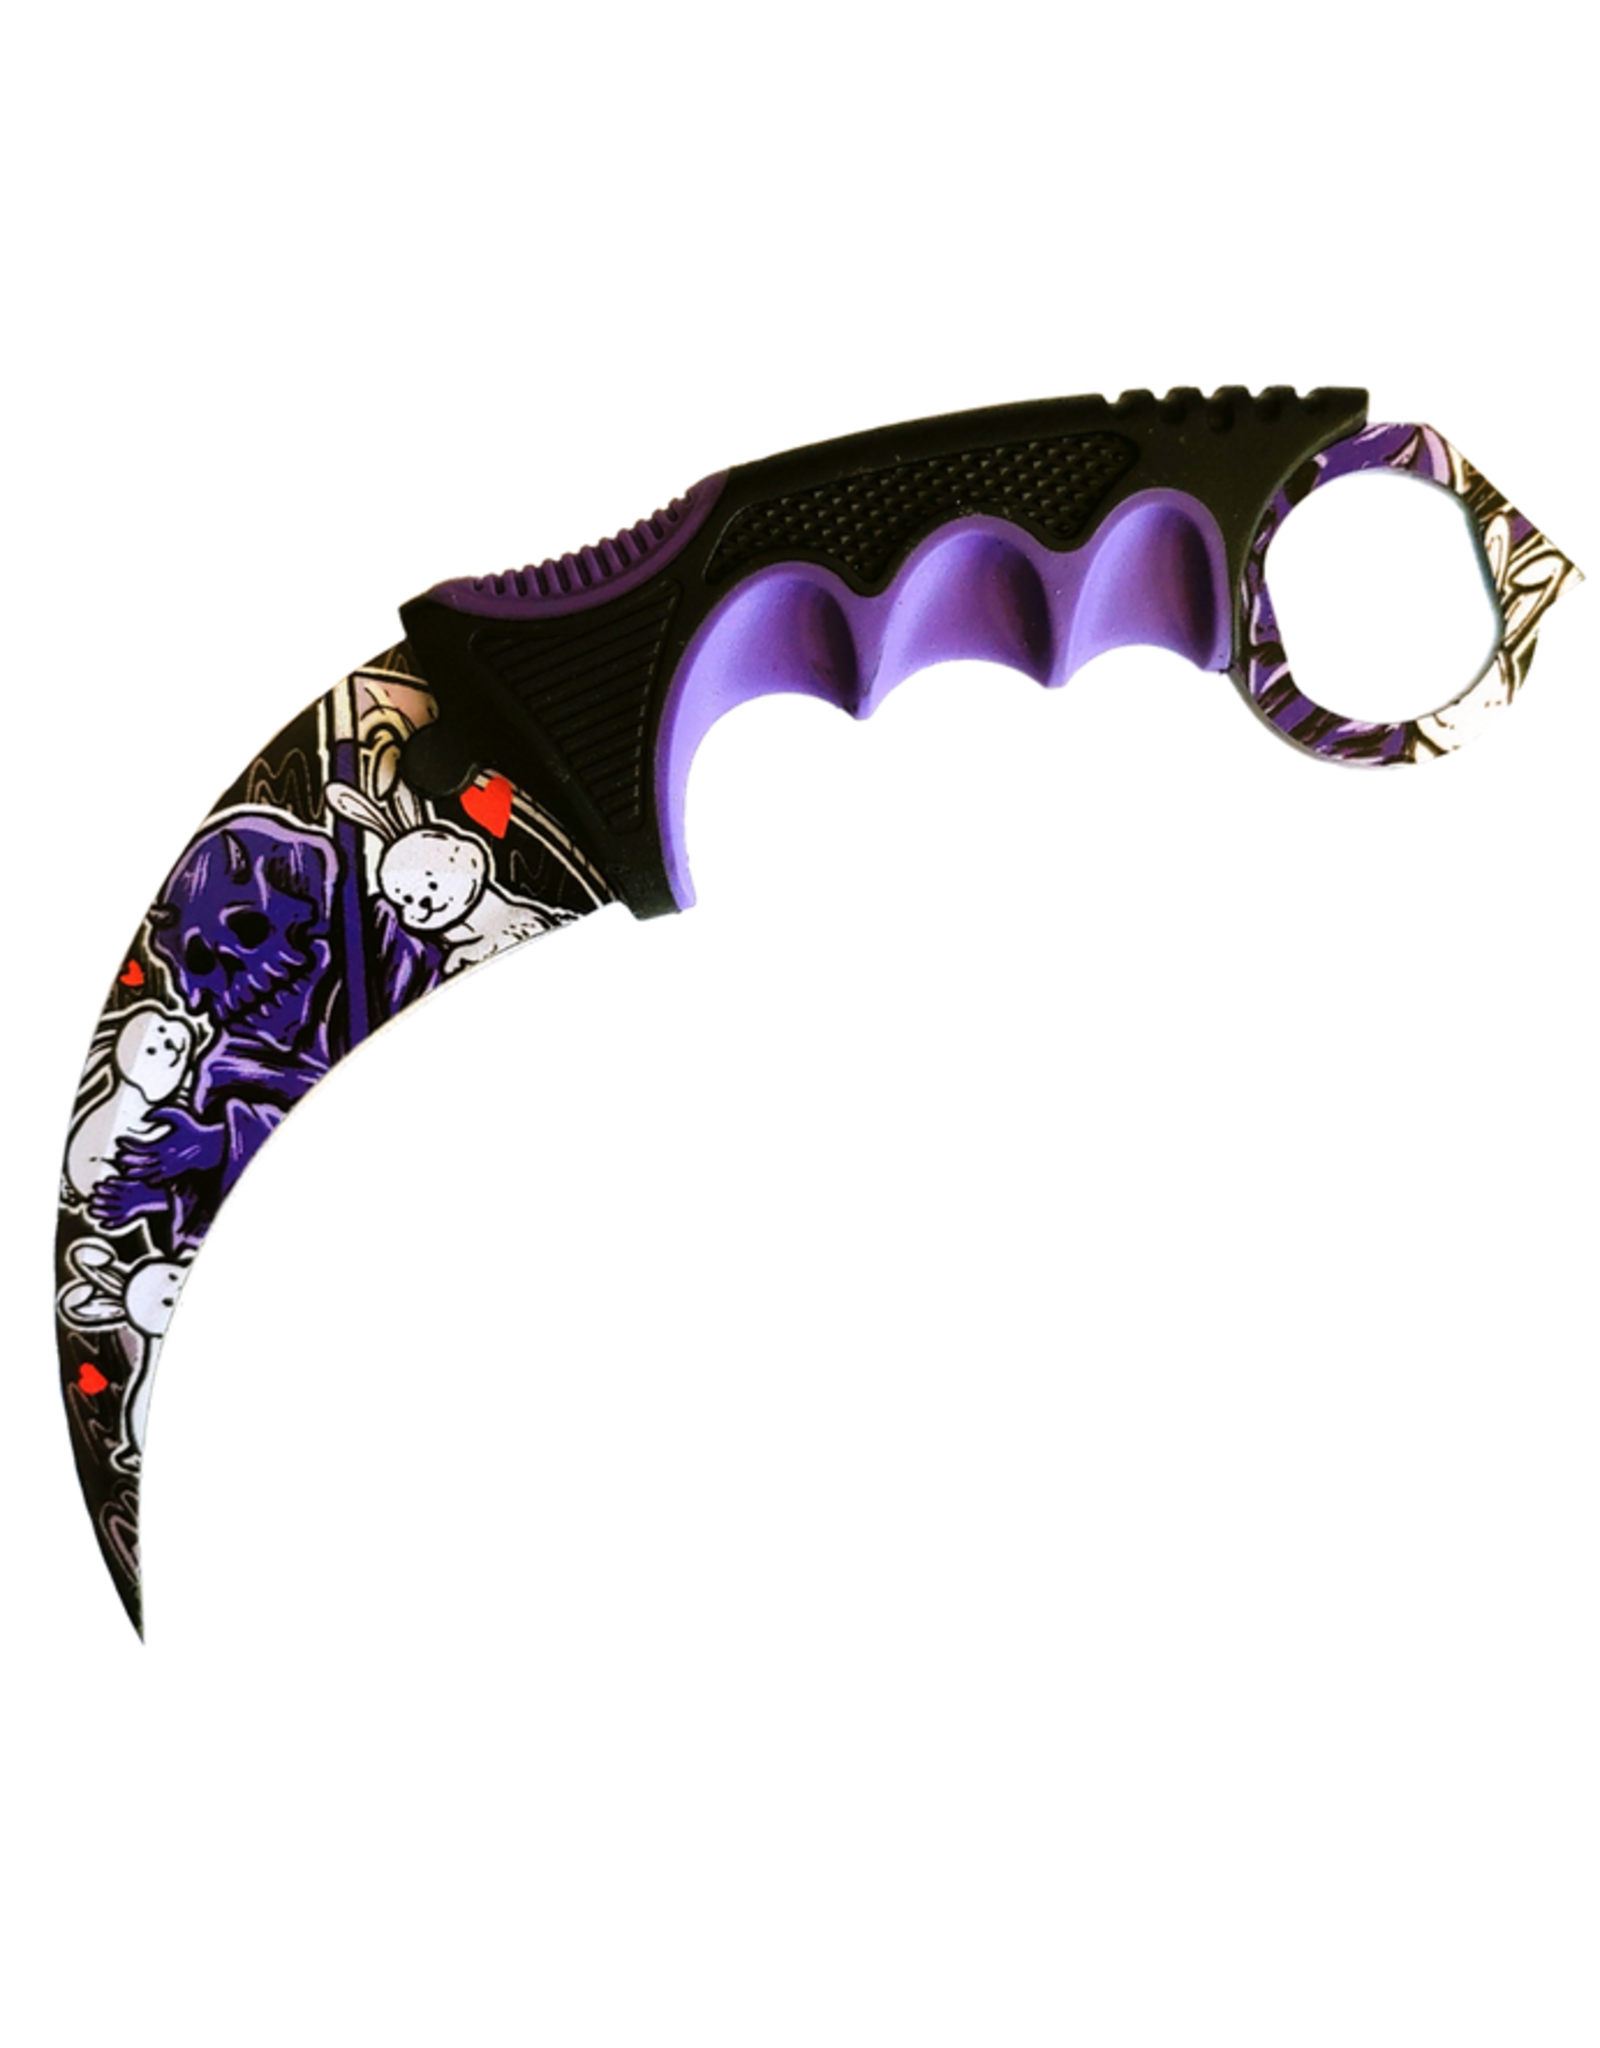 Plague Karambit Knife - Death #1 All You Need Is Love 122 21DT002-75PP